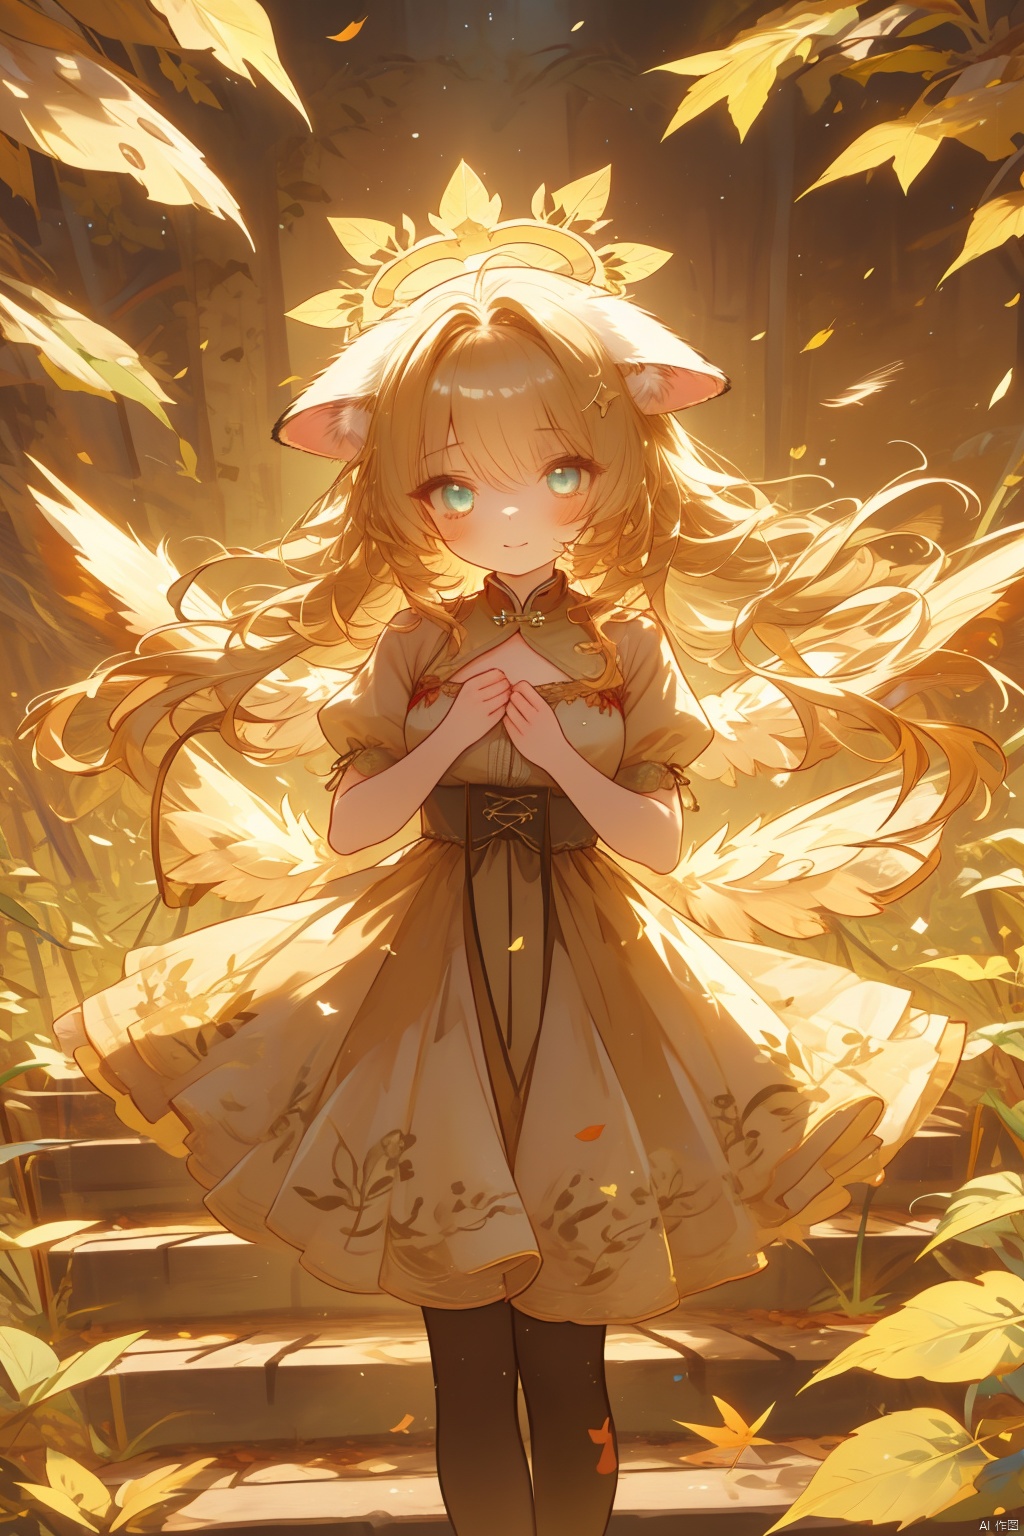  (wings:1.5),In this autumn afternoon, the sun shines through the gaps in the leaves and shines on a special girl.She has a pair of pointed cat ears and a soft cat tail, which adds a bit of mystery and playfulness to her.Her face is delicate and delicate, and her eyes are as clear as cat eyes, sparkling with curiosity and agility.The girl was wearing an autumn-style dress, and the skirt swayed gently with her steps, as if she was dancing with the wind.The design of the skirt is delicate and elegant, with exquisite embroidered patterns that complement her cat ears and tail.The color of the skirt is mainly warm tones, which perfectly blends with the surrounding autumn scenery, presenting a warm and harmonious feeling.The surroundings are equally intoxicating.The girl was in a golden forest, with fallen leaves covering the ground, making a rustling sound when stepped on.The sun shone on her through the leaves, casting a golden halo on her.Around her, there are several cute little animals playing, adding a bit of liveliness, (\shen ming shao nv\), jiqing